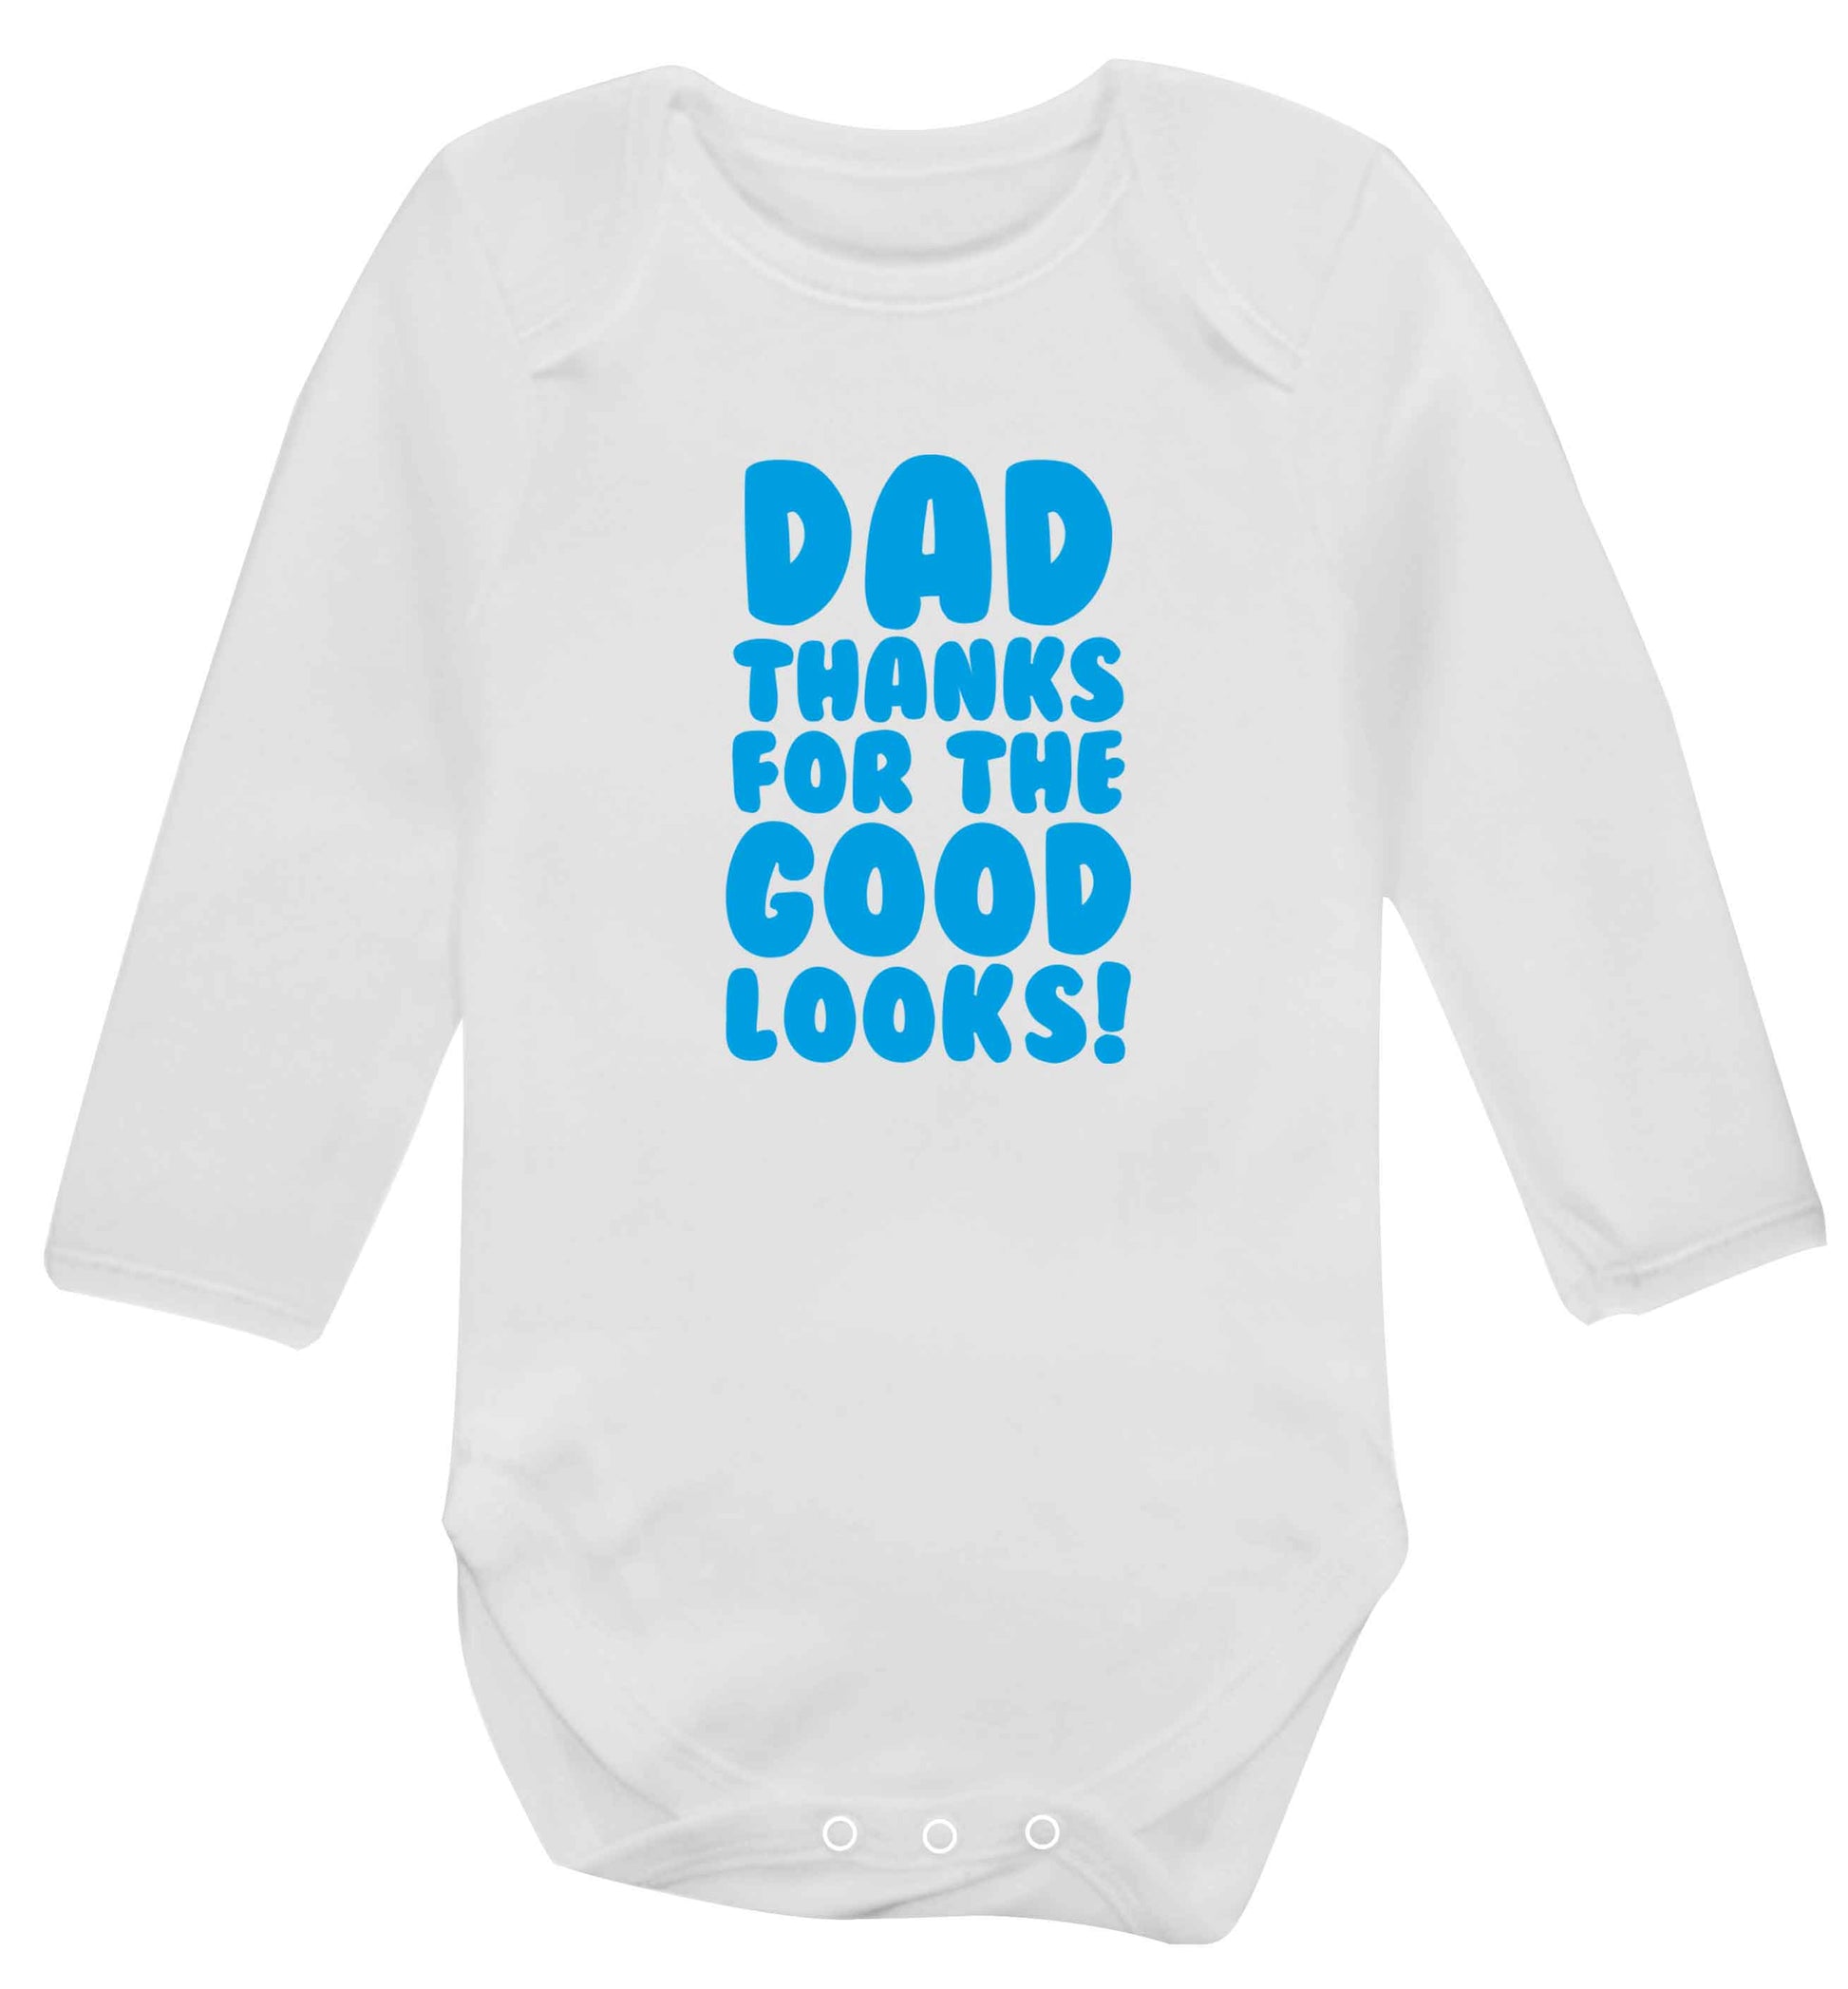 Dad thanks for the good looks baby vest long sleeved white 6-12 months